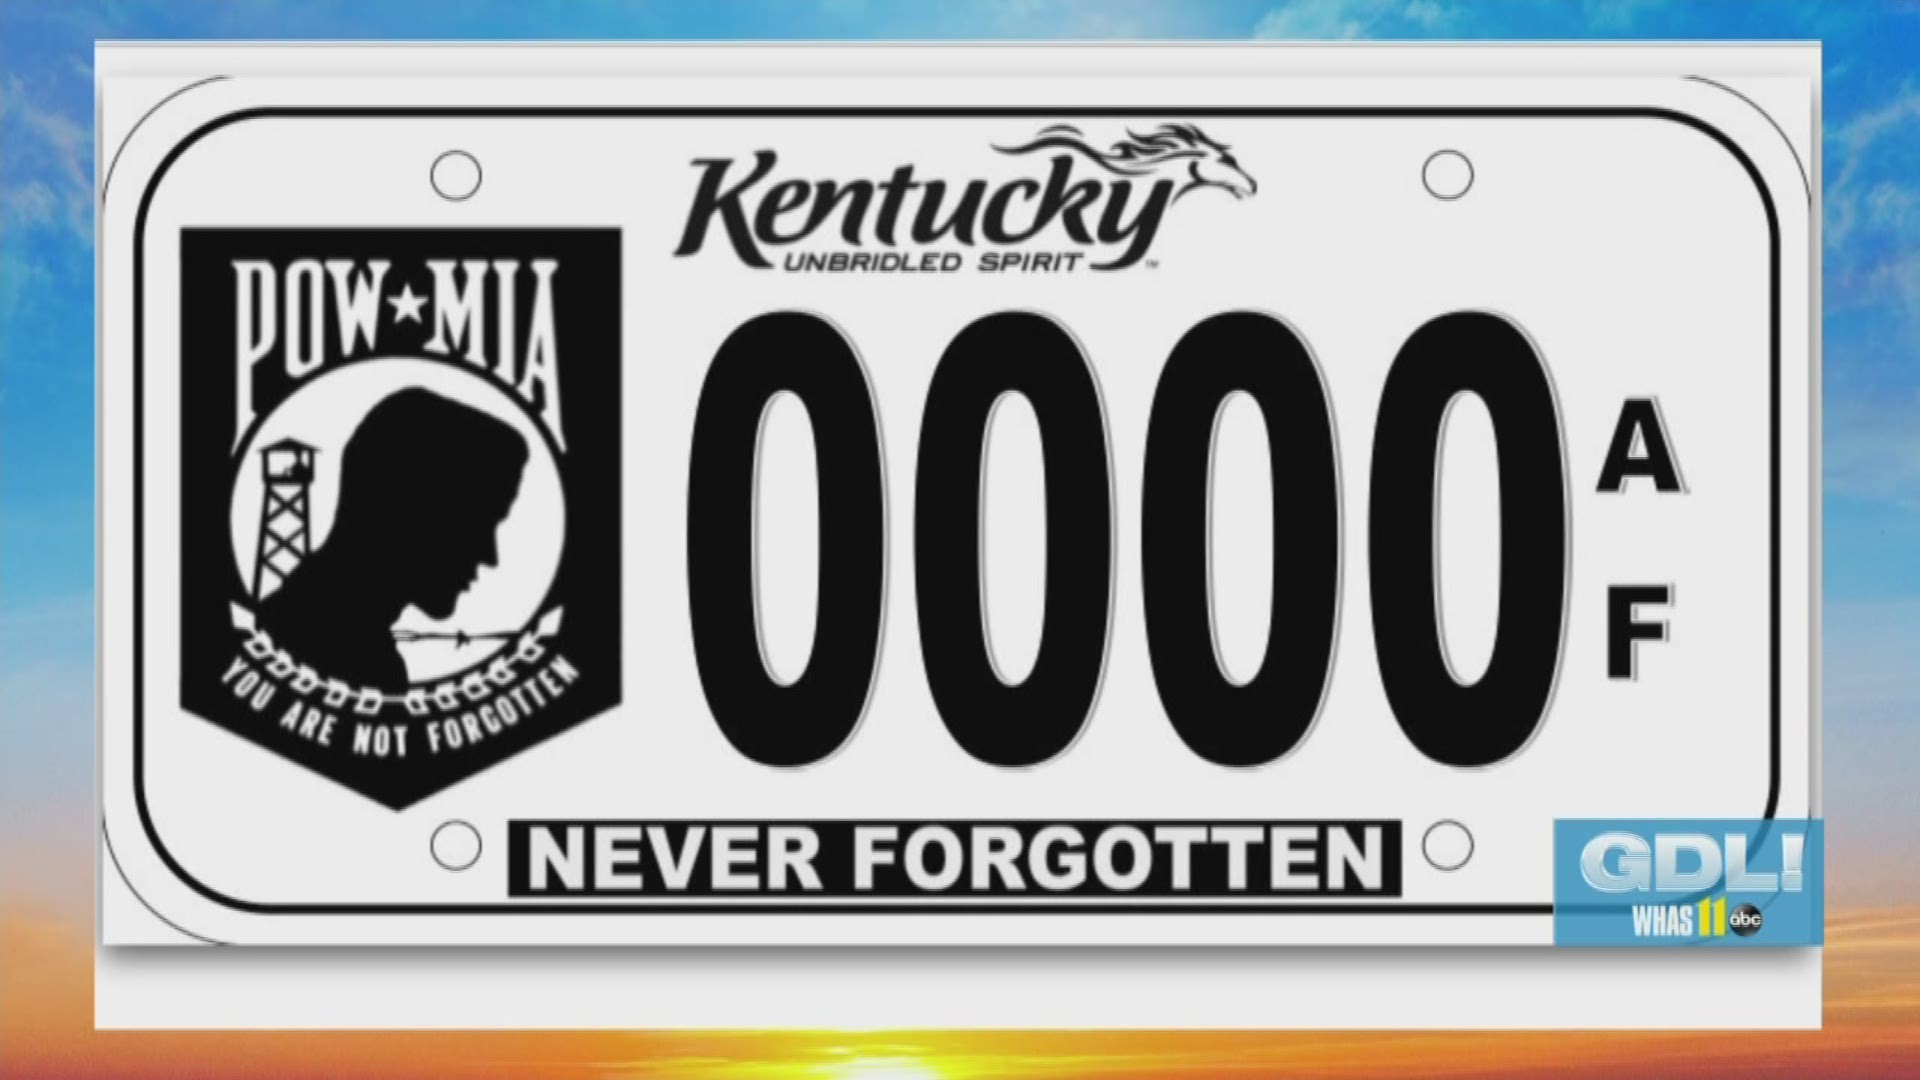 Reserve your plate and show support today by sending %2425 check to the Rolling Thunder KY Chapter 2 at P.O. Box 473, Glasgow, KY 42141.

More information can be found by calling 270-646-8603